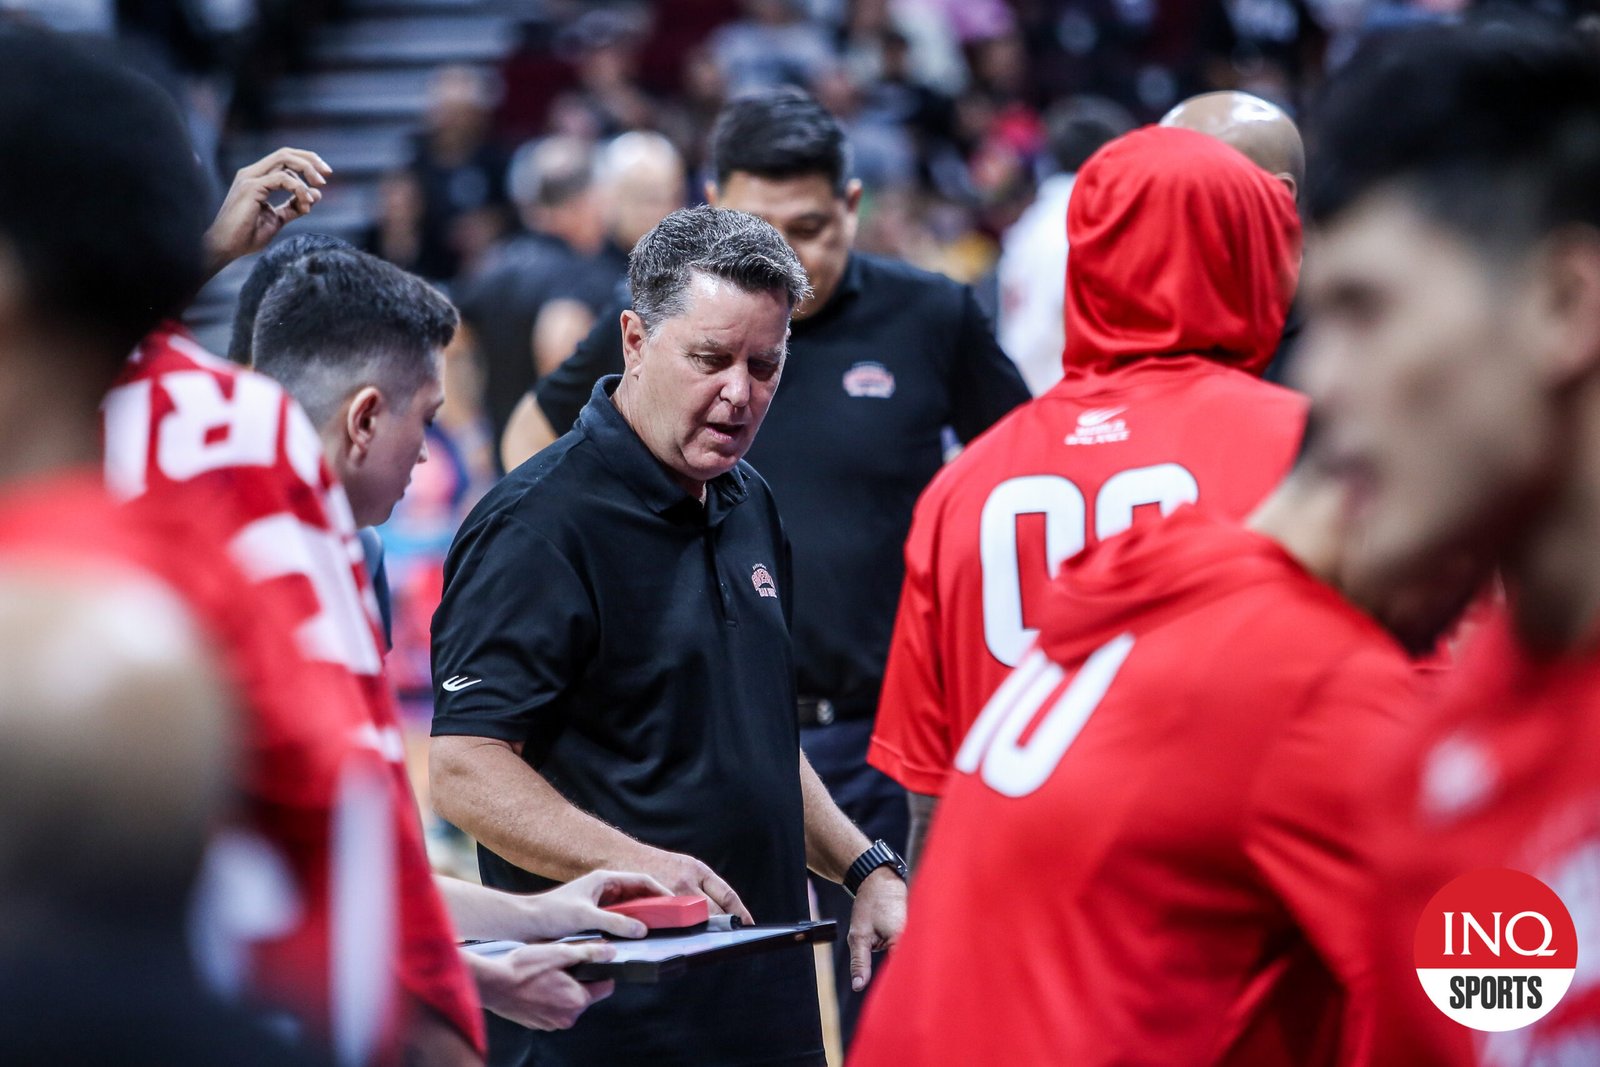 Tim Cone lauds ‘very deep’ San Miguel after Ginebra exit